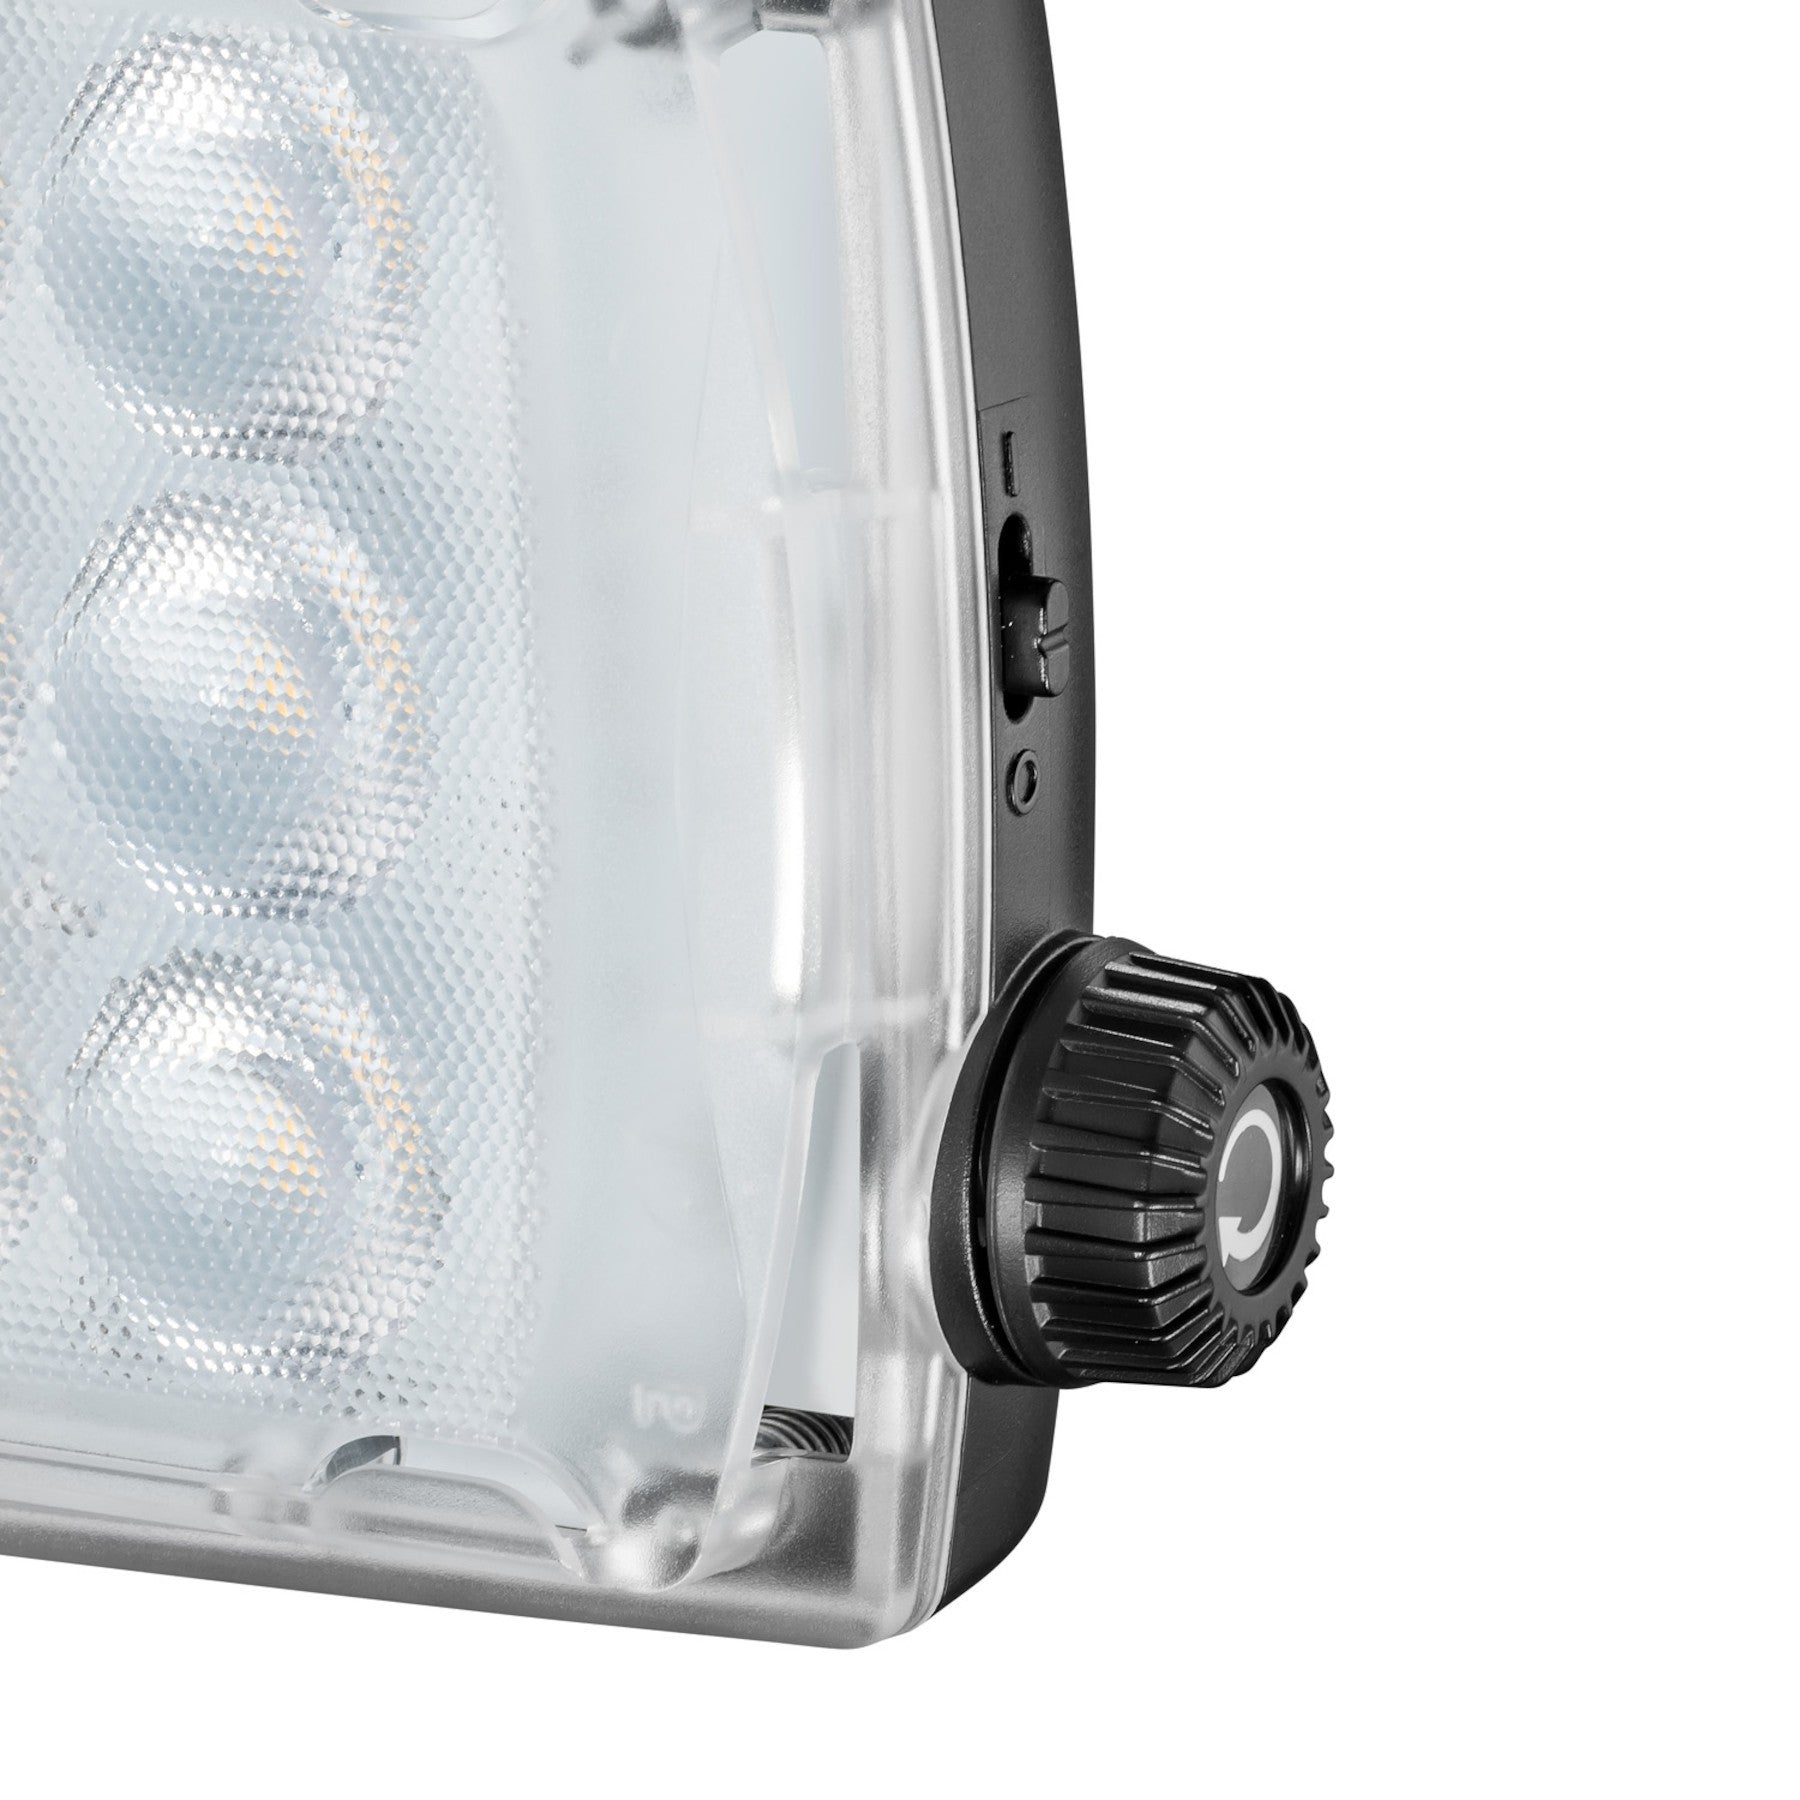 Manfrotto SPECTRA2 LED Light, lighting led lights, Manfrotto - Pictureline  - 3